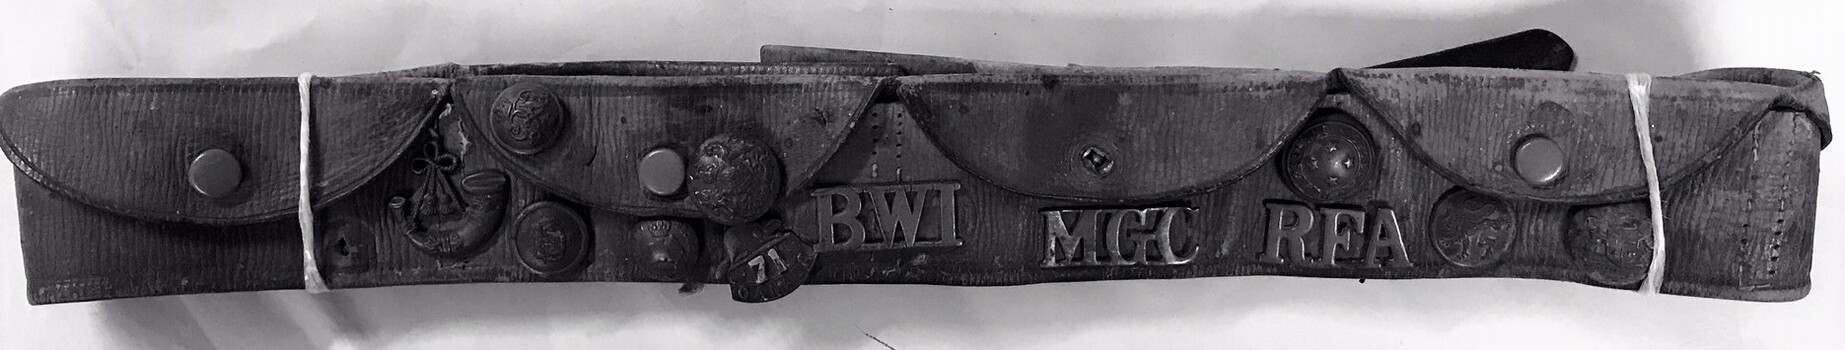 Leather belt with pockets and badges